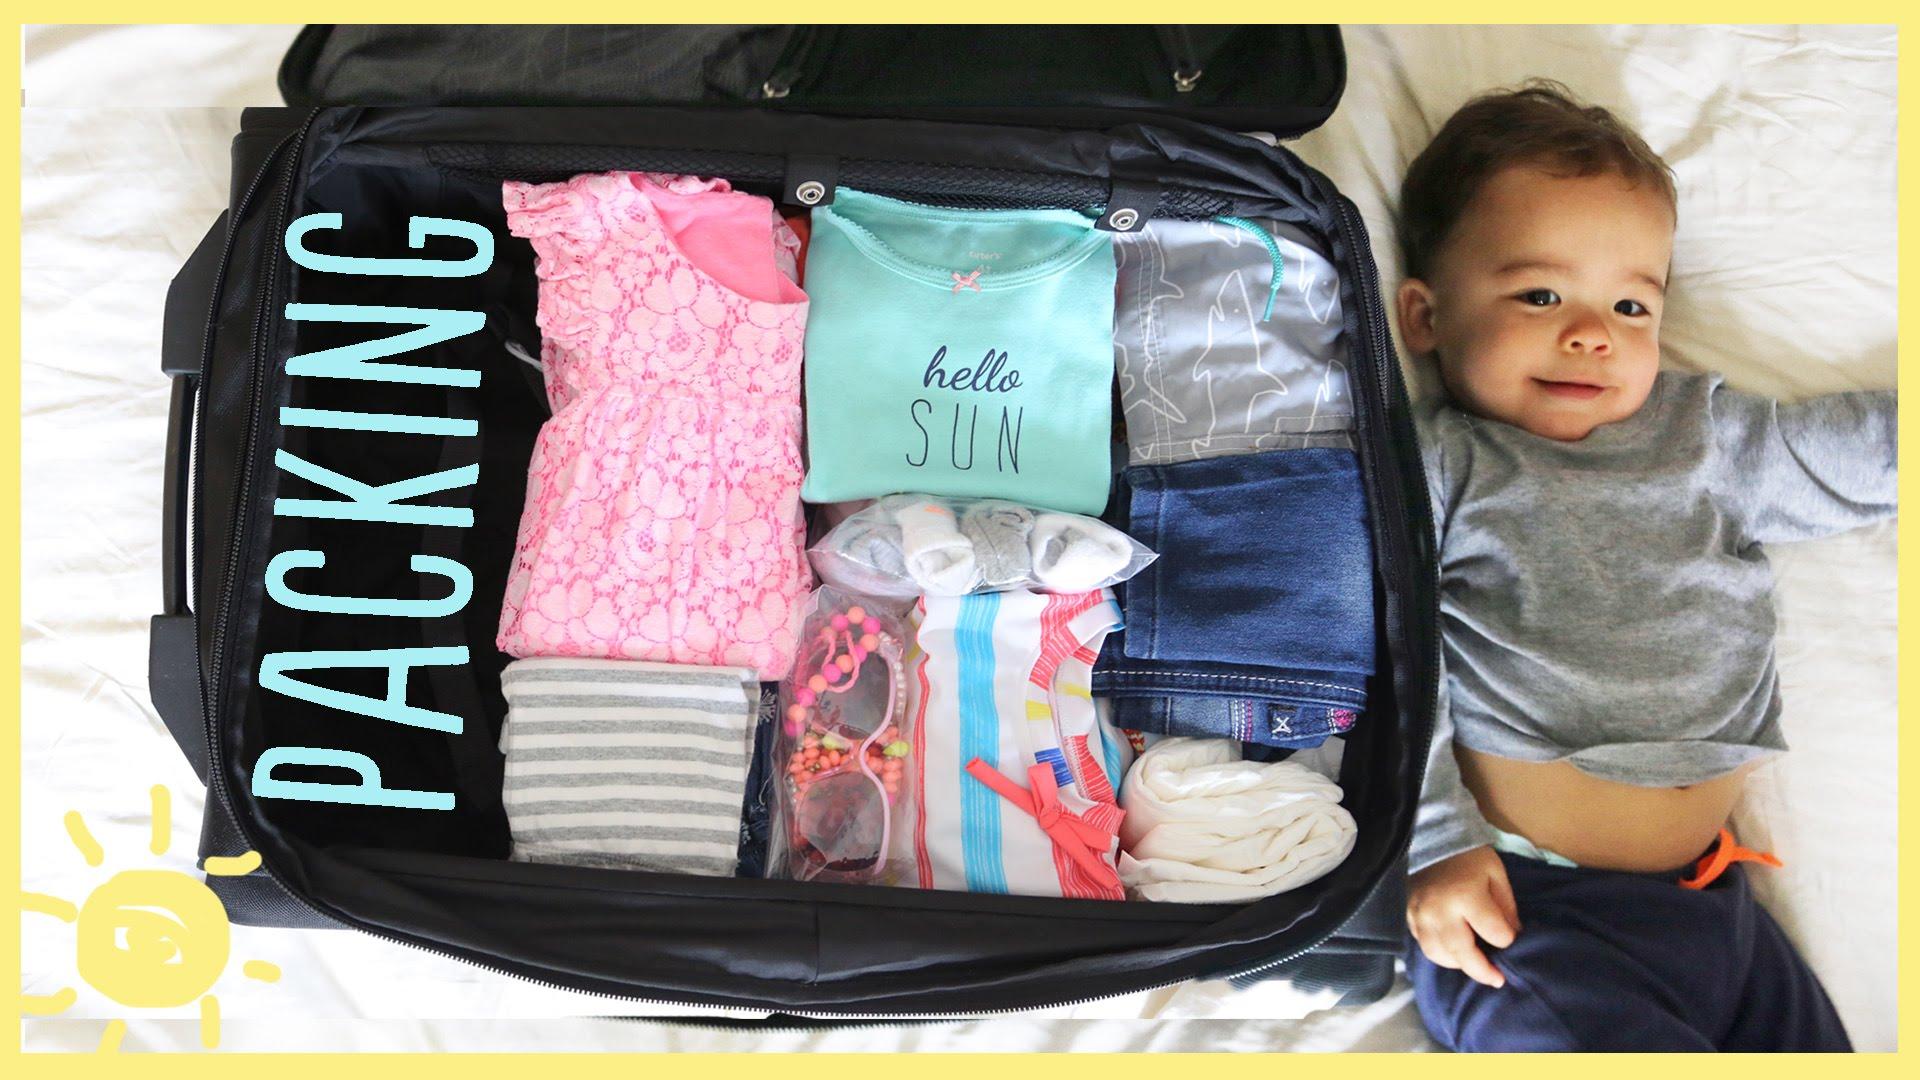 Check out this video on travel packing tips for kids. Learn how to pack for a family trip efficiently and quickly! These tips are perfect for busy moms.